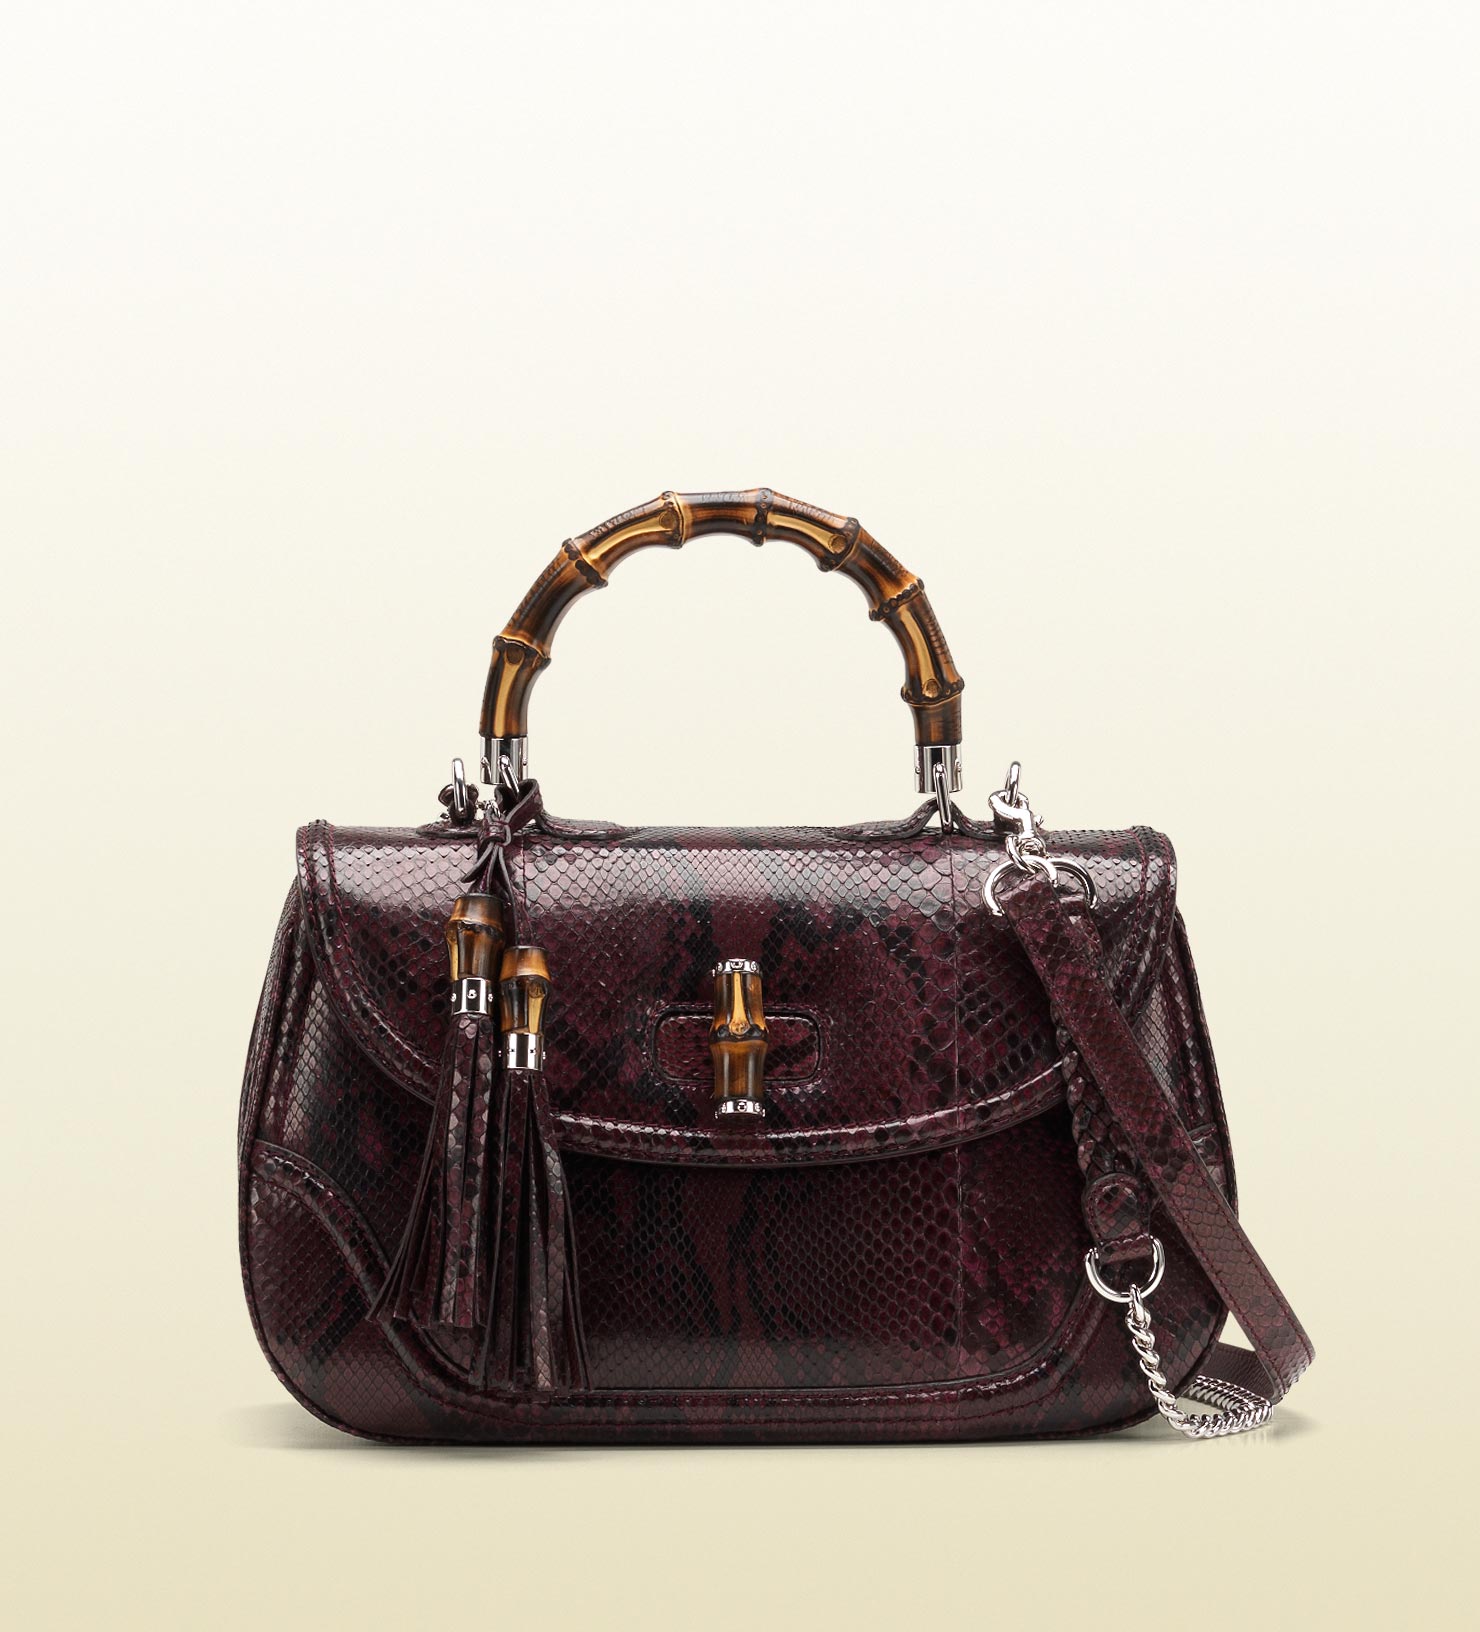 Lyst - Gucci New Bamboo Shaded Python Top Handle Bag in Purple